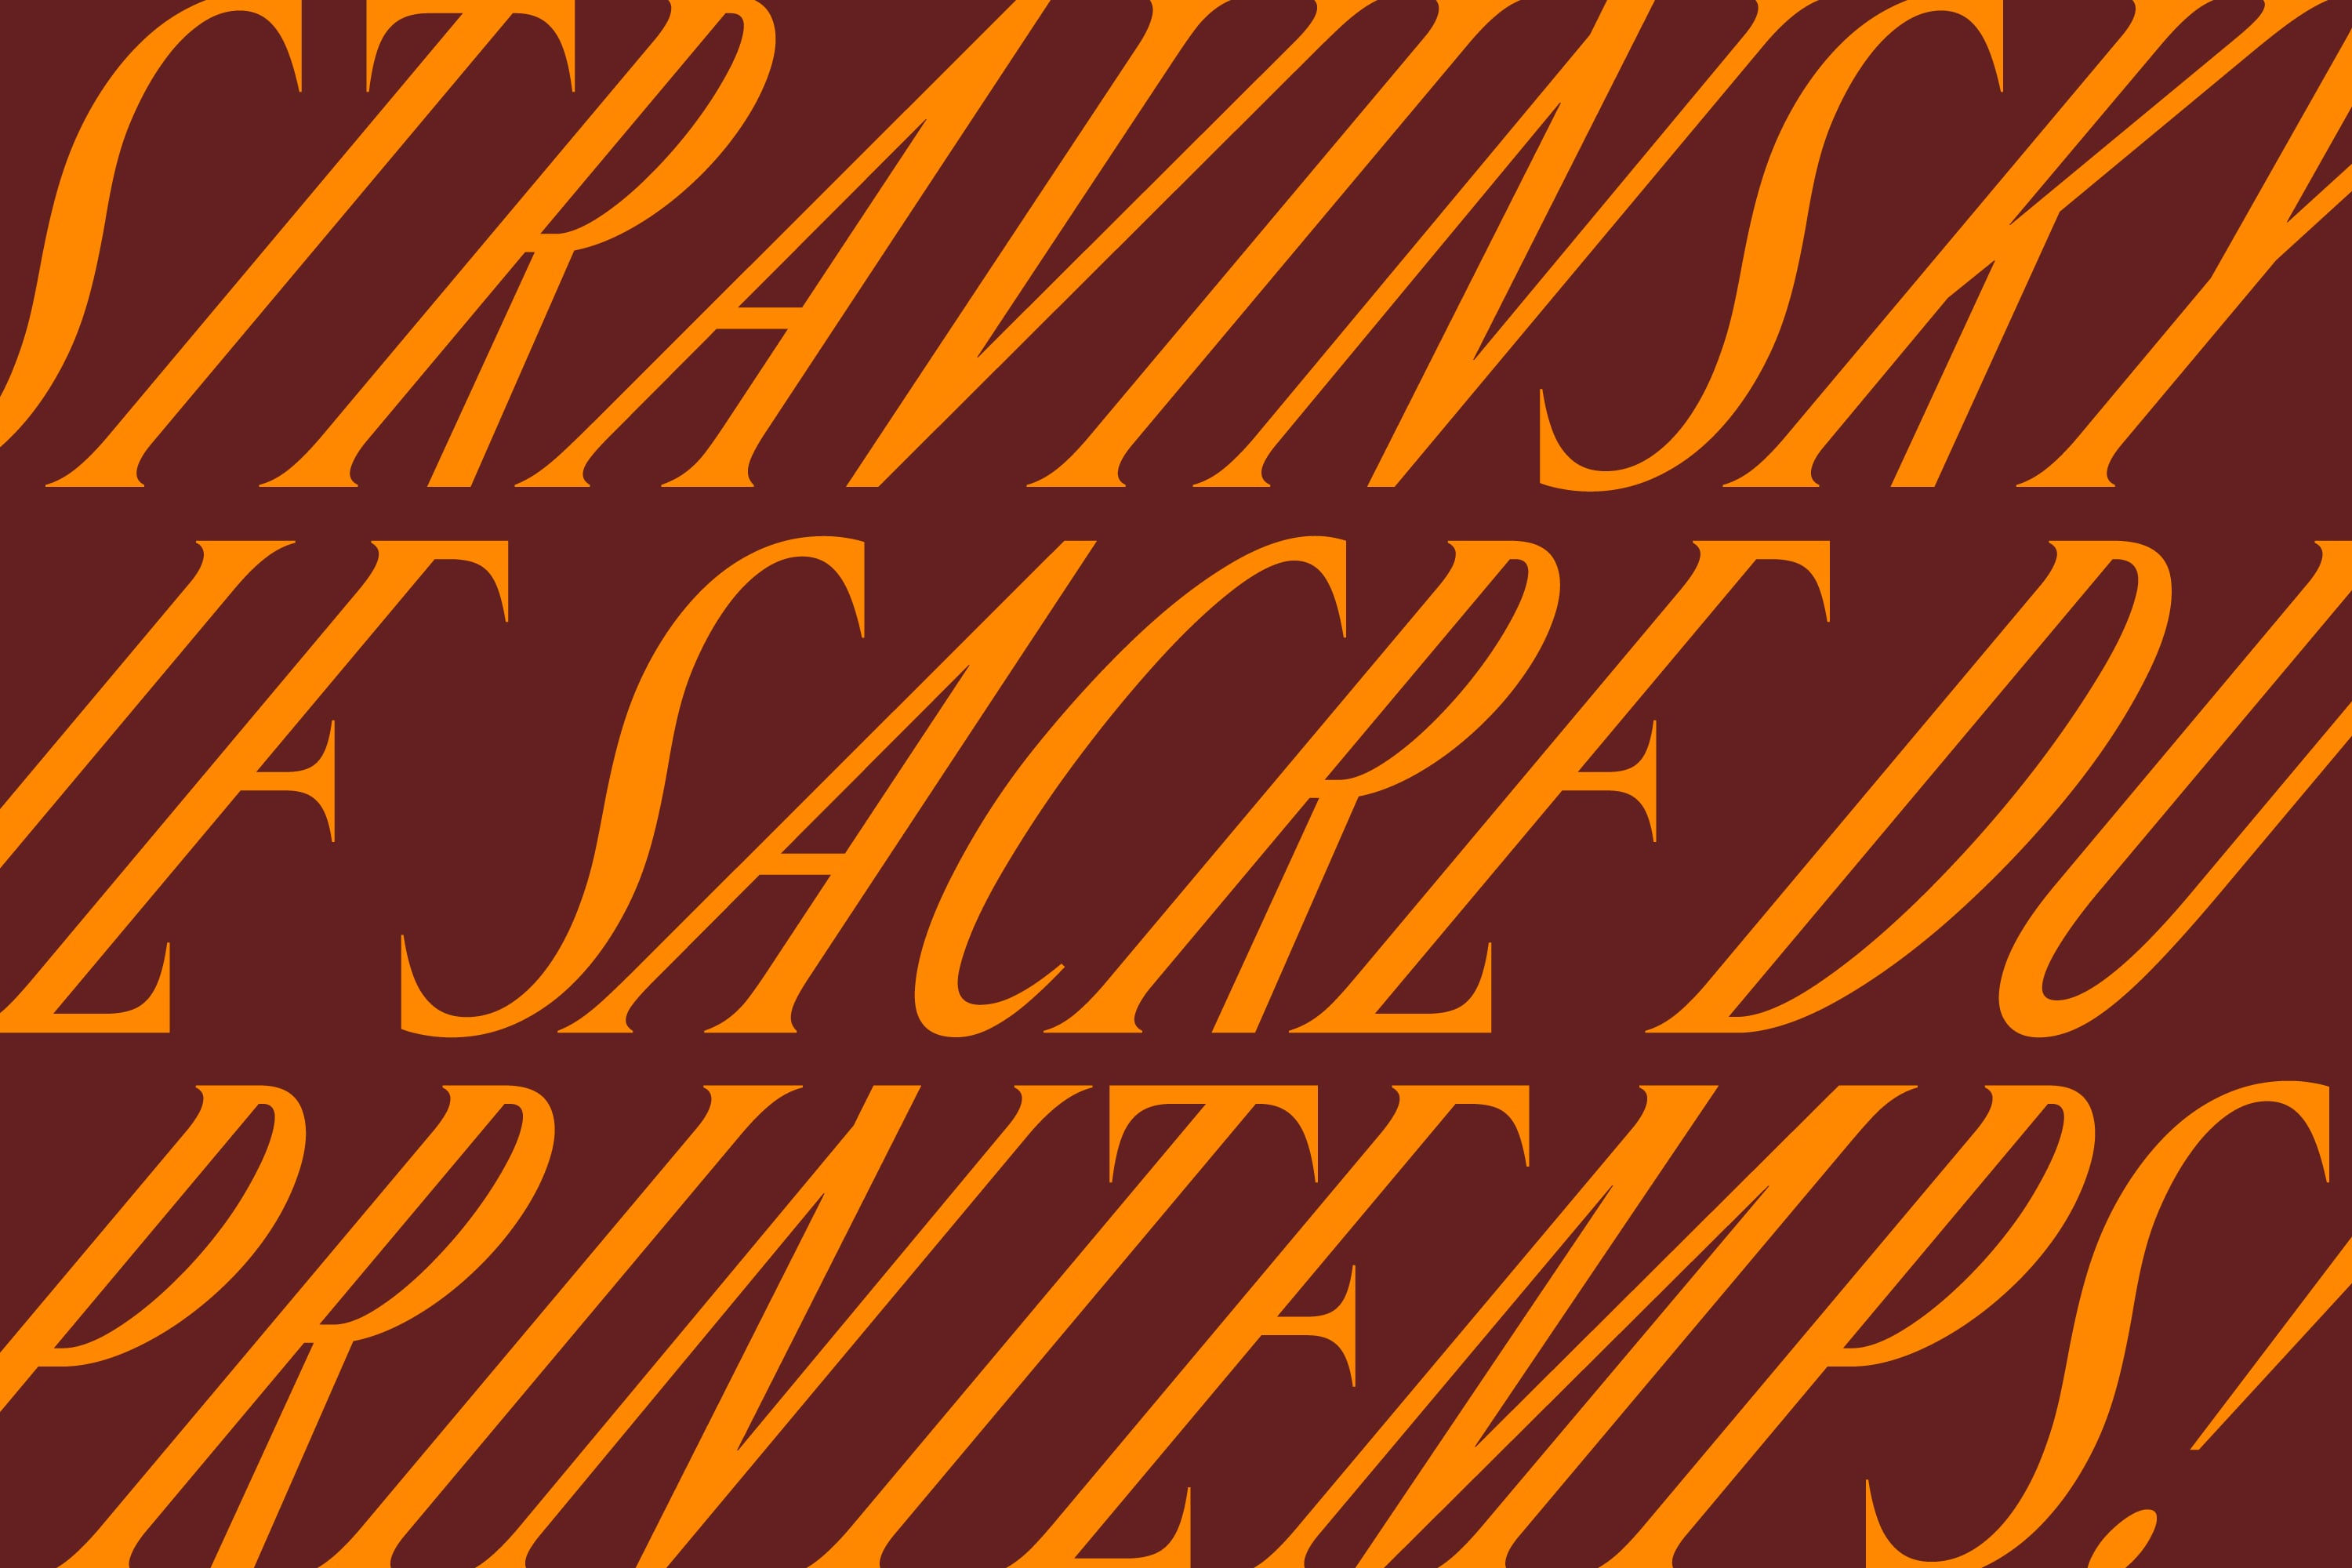 Custom typeface designed by Collins for San Francisco Symphony